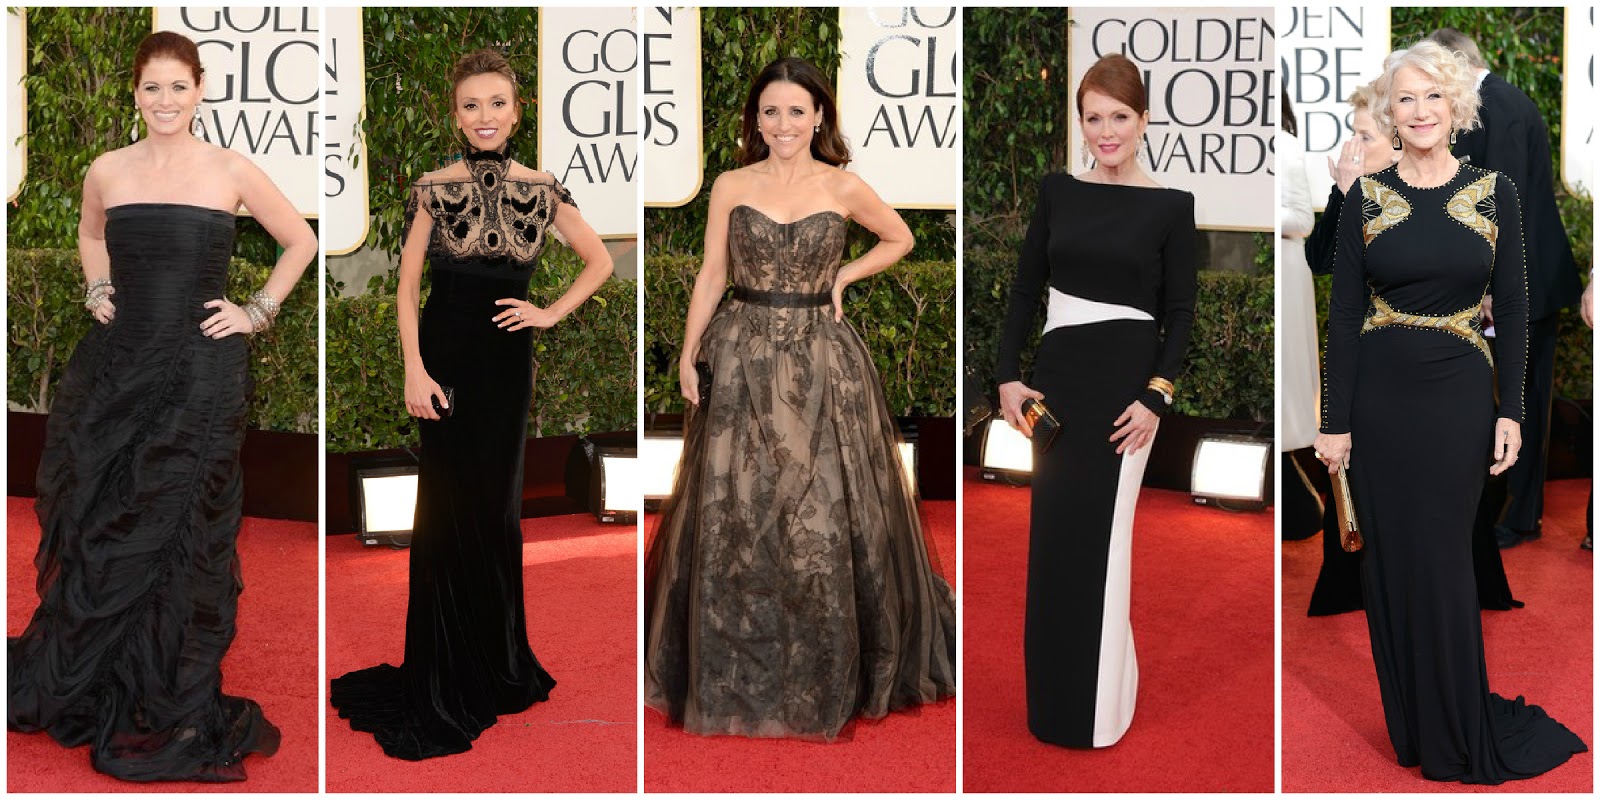 2013 GOLDEN GLOBE RED CARPET ARRIVALS - A Day In The Life Of This Miss